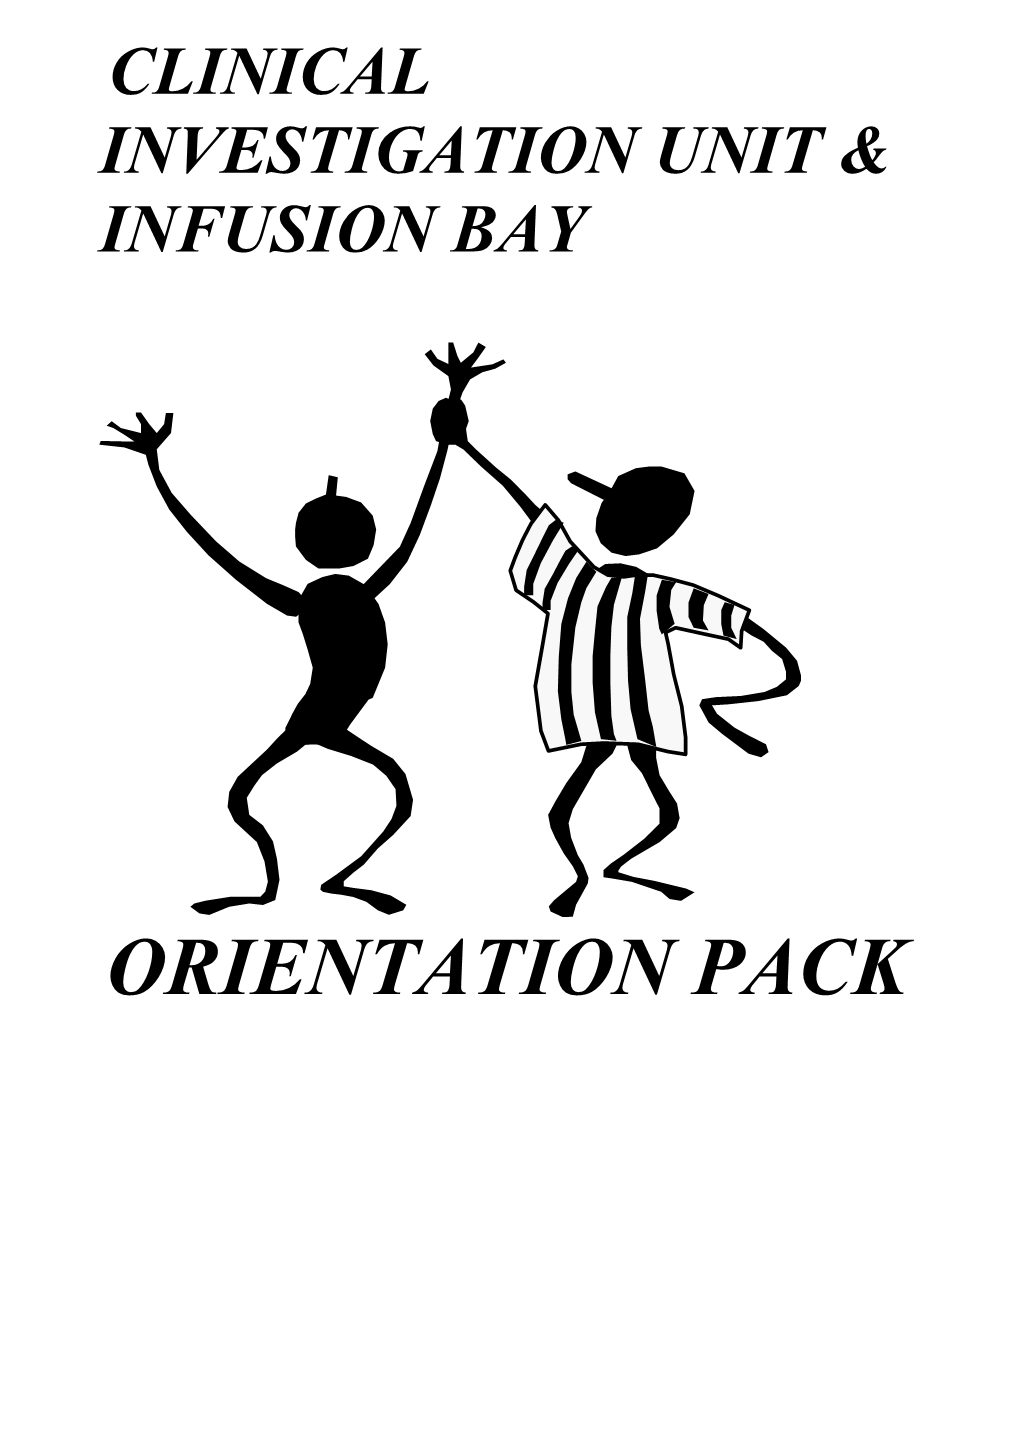 Welcome to the Clinical Investigation Unit & Infusion Bay